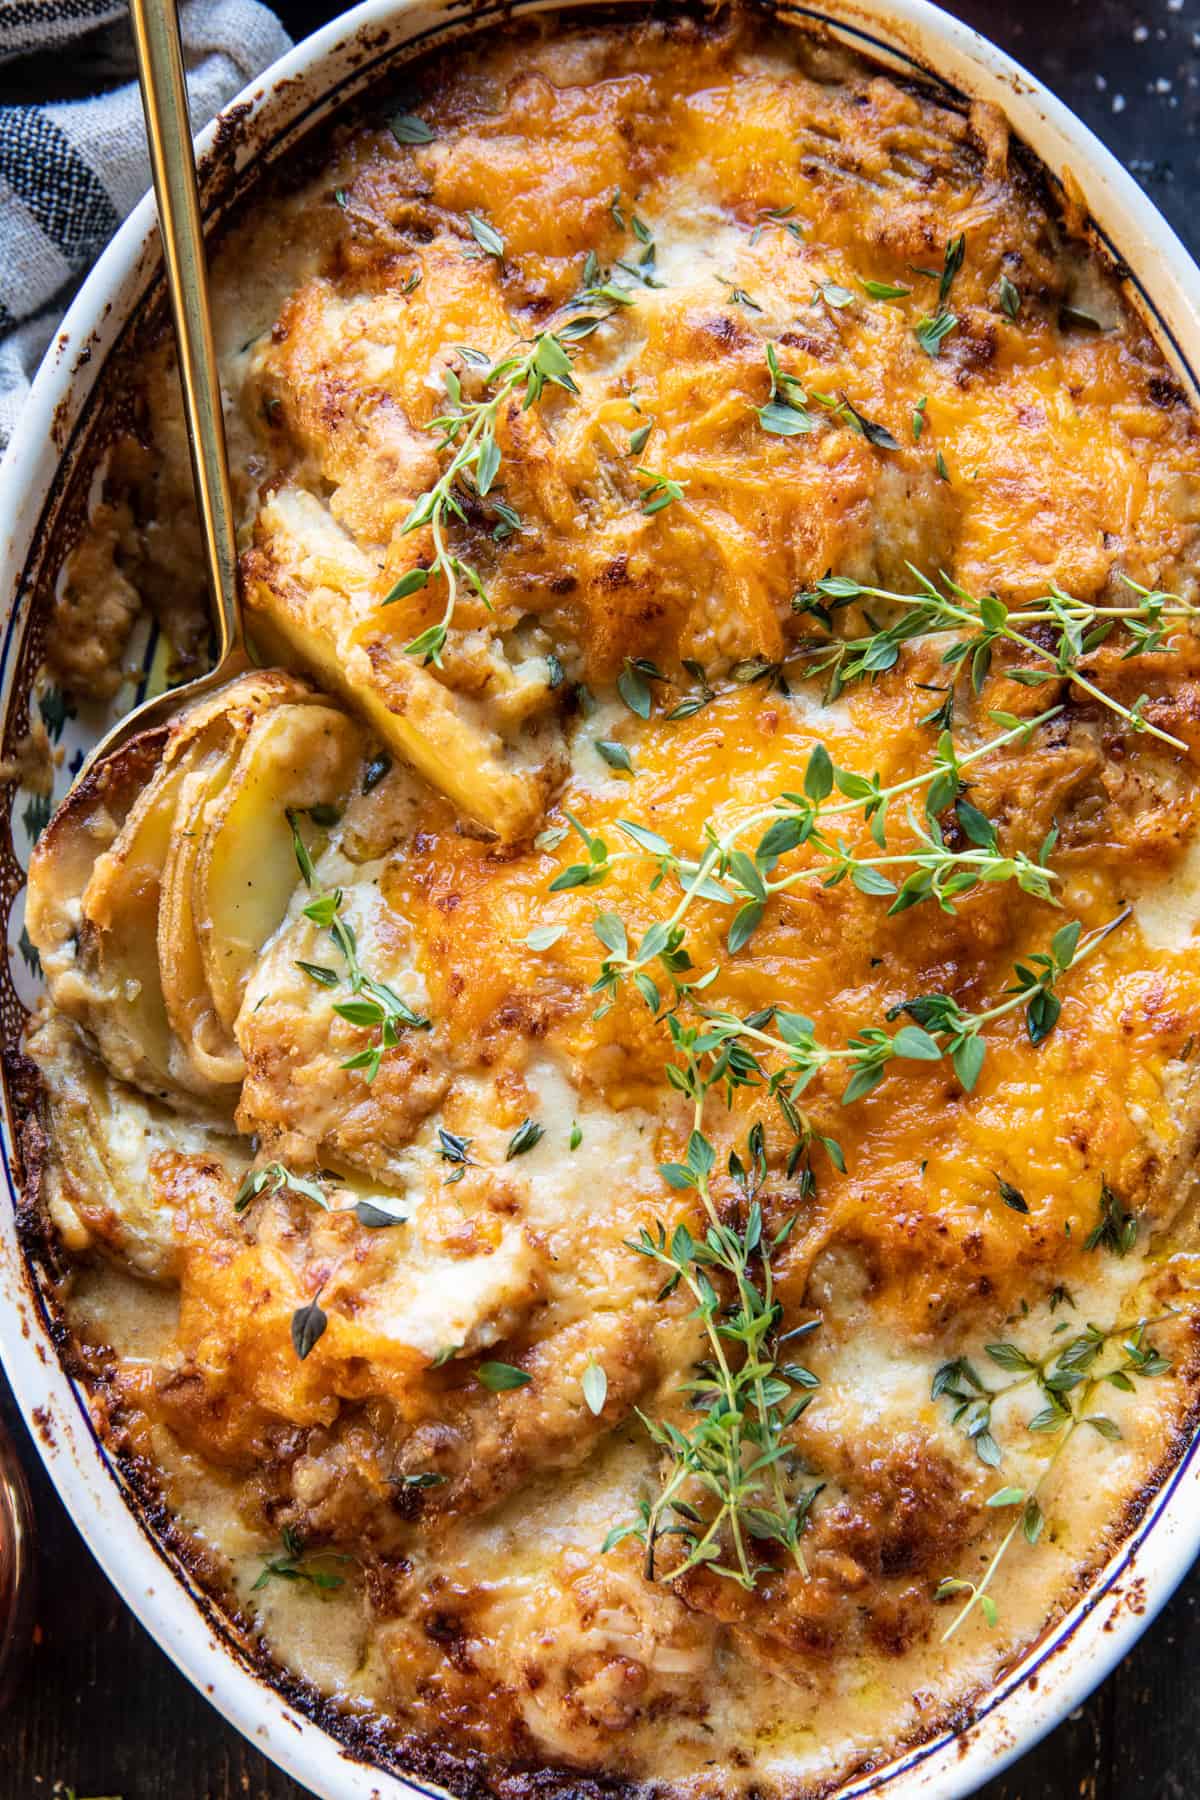 Cheesy Scalloped Potatoes with Caramelized Onions | halfbakedharvest.com